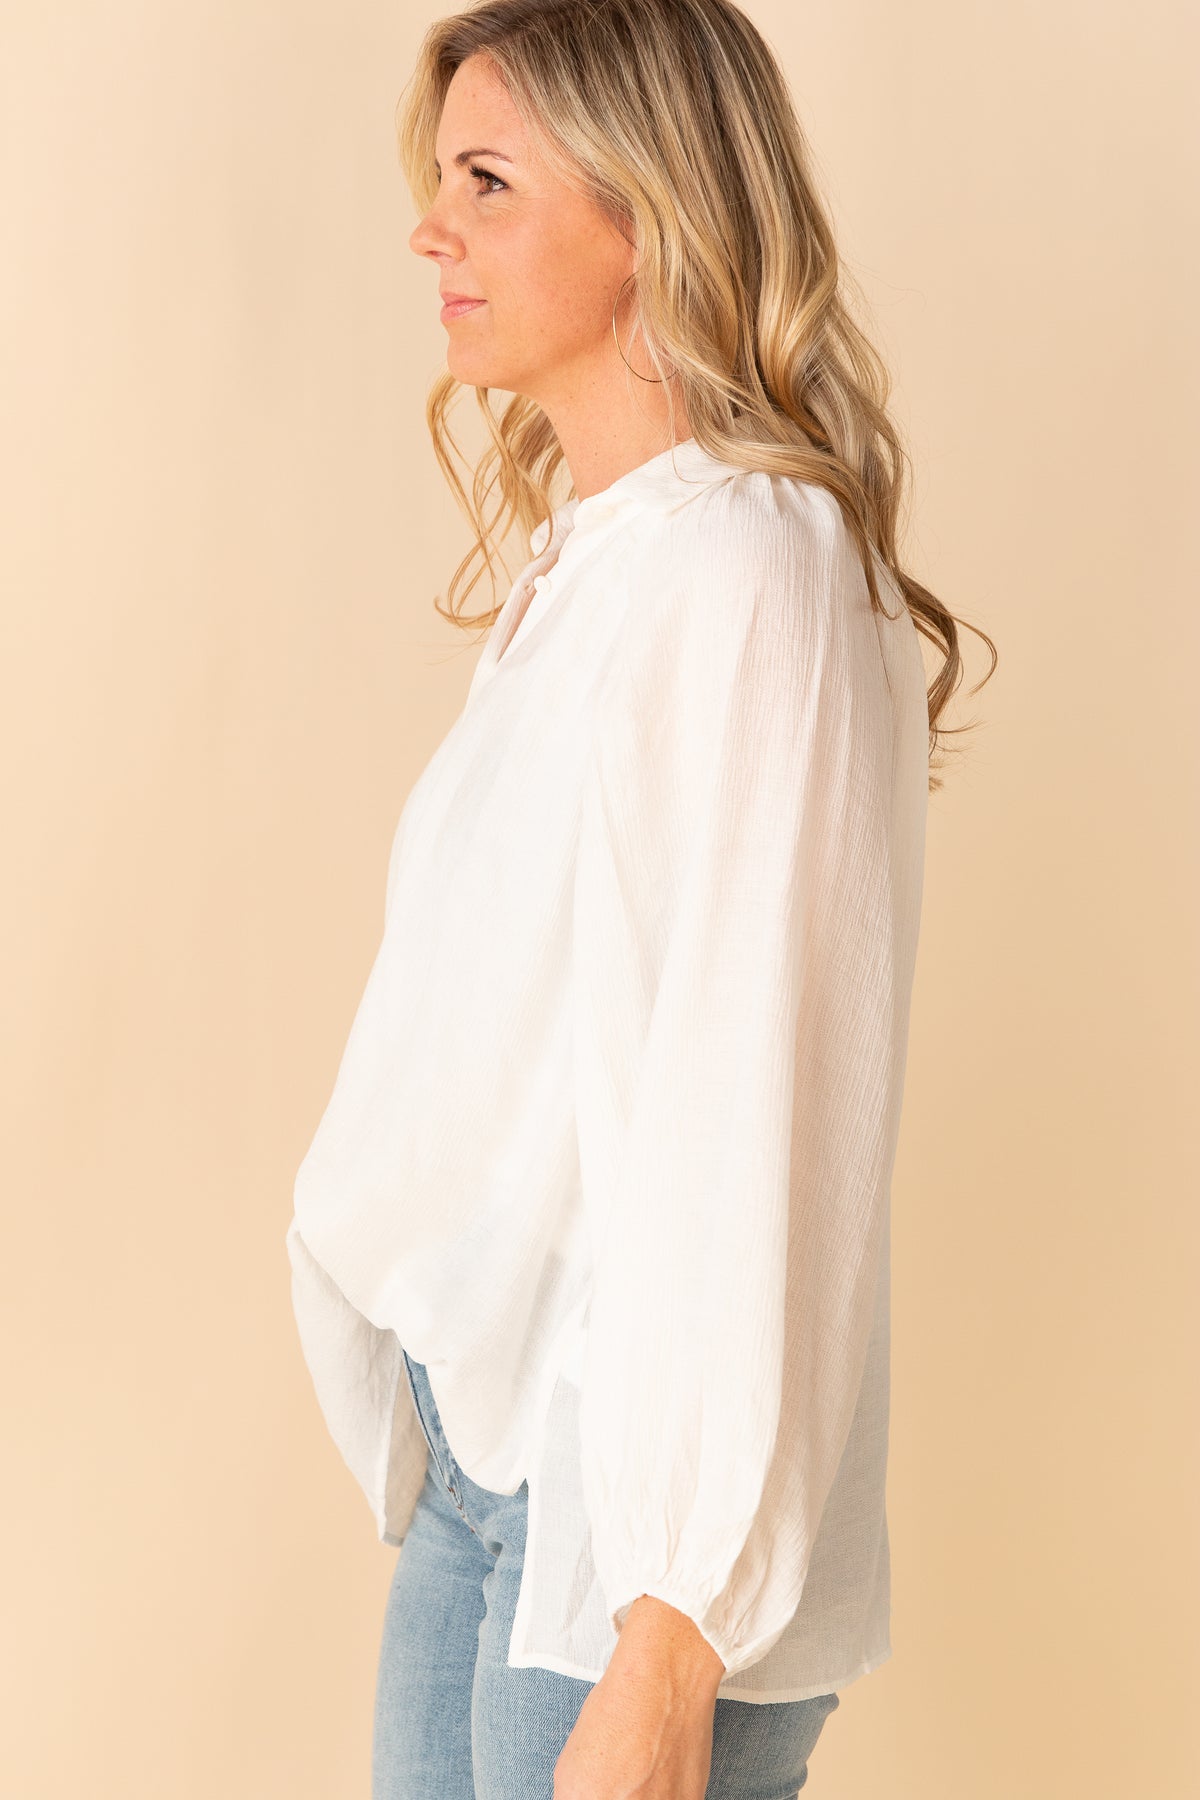 Courtney Loose Fit Button Up Top